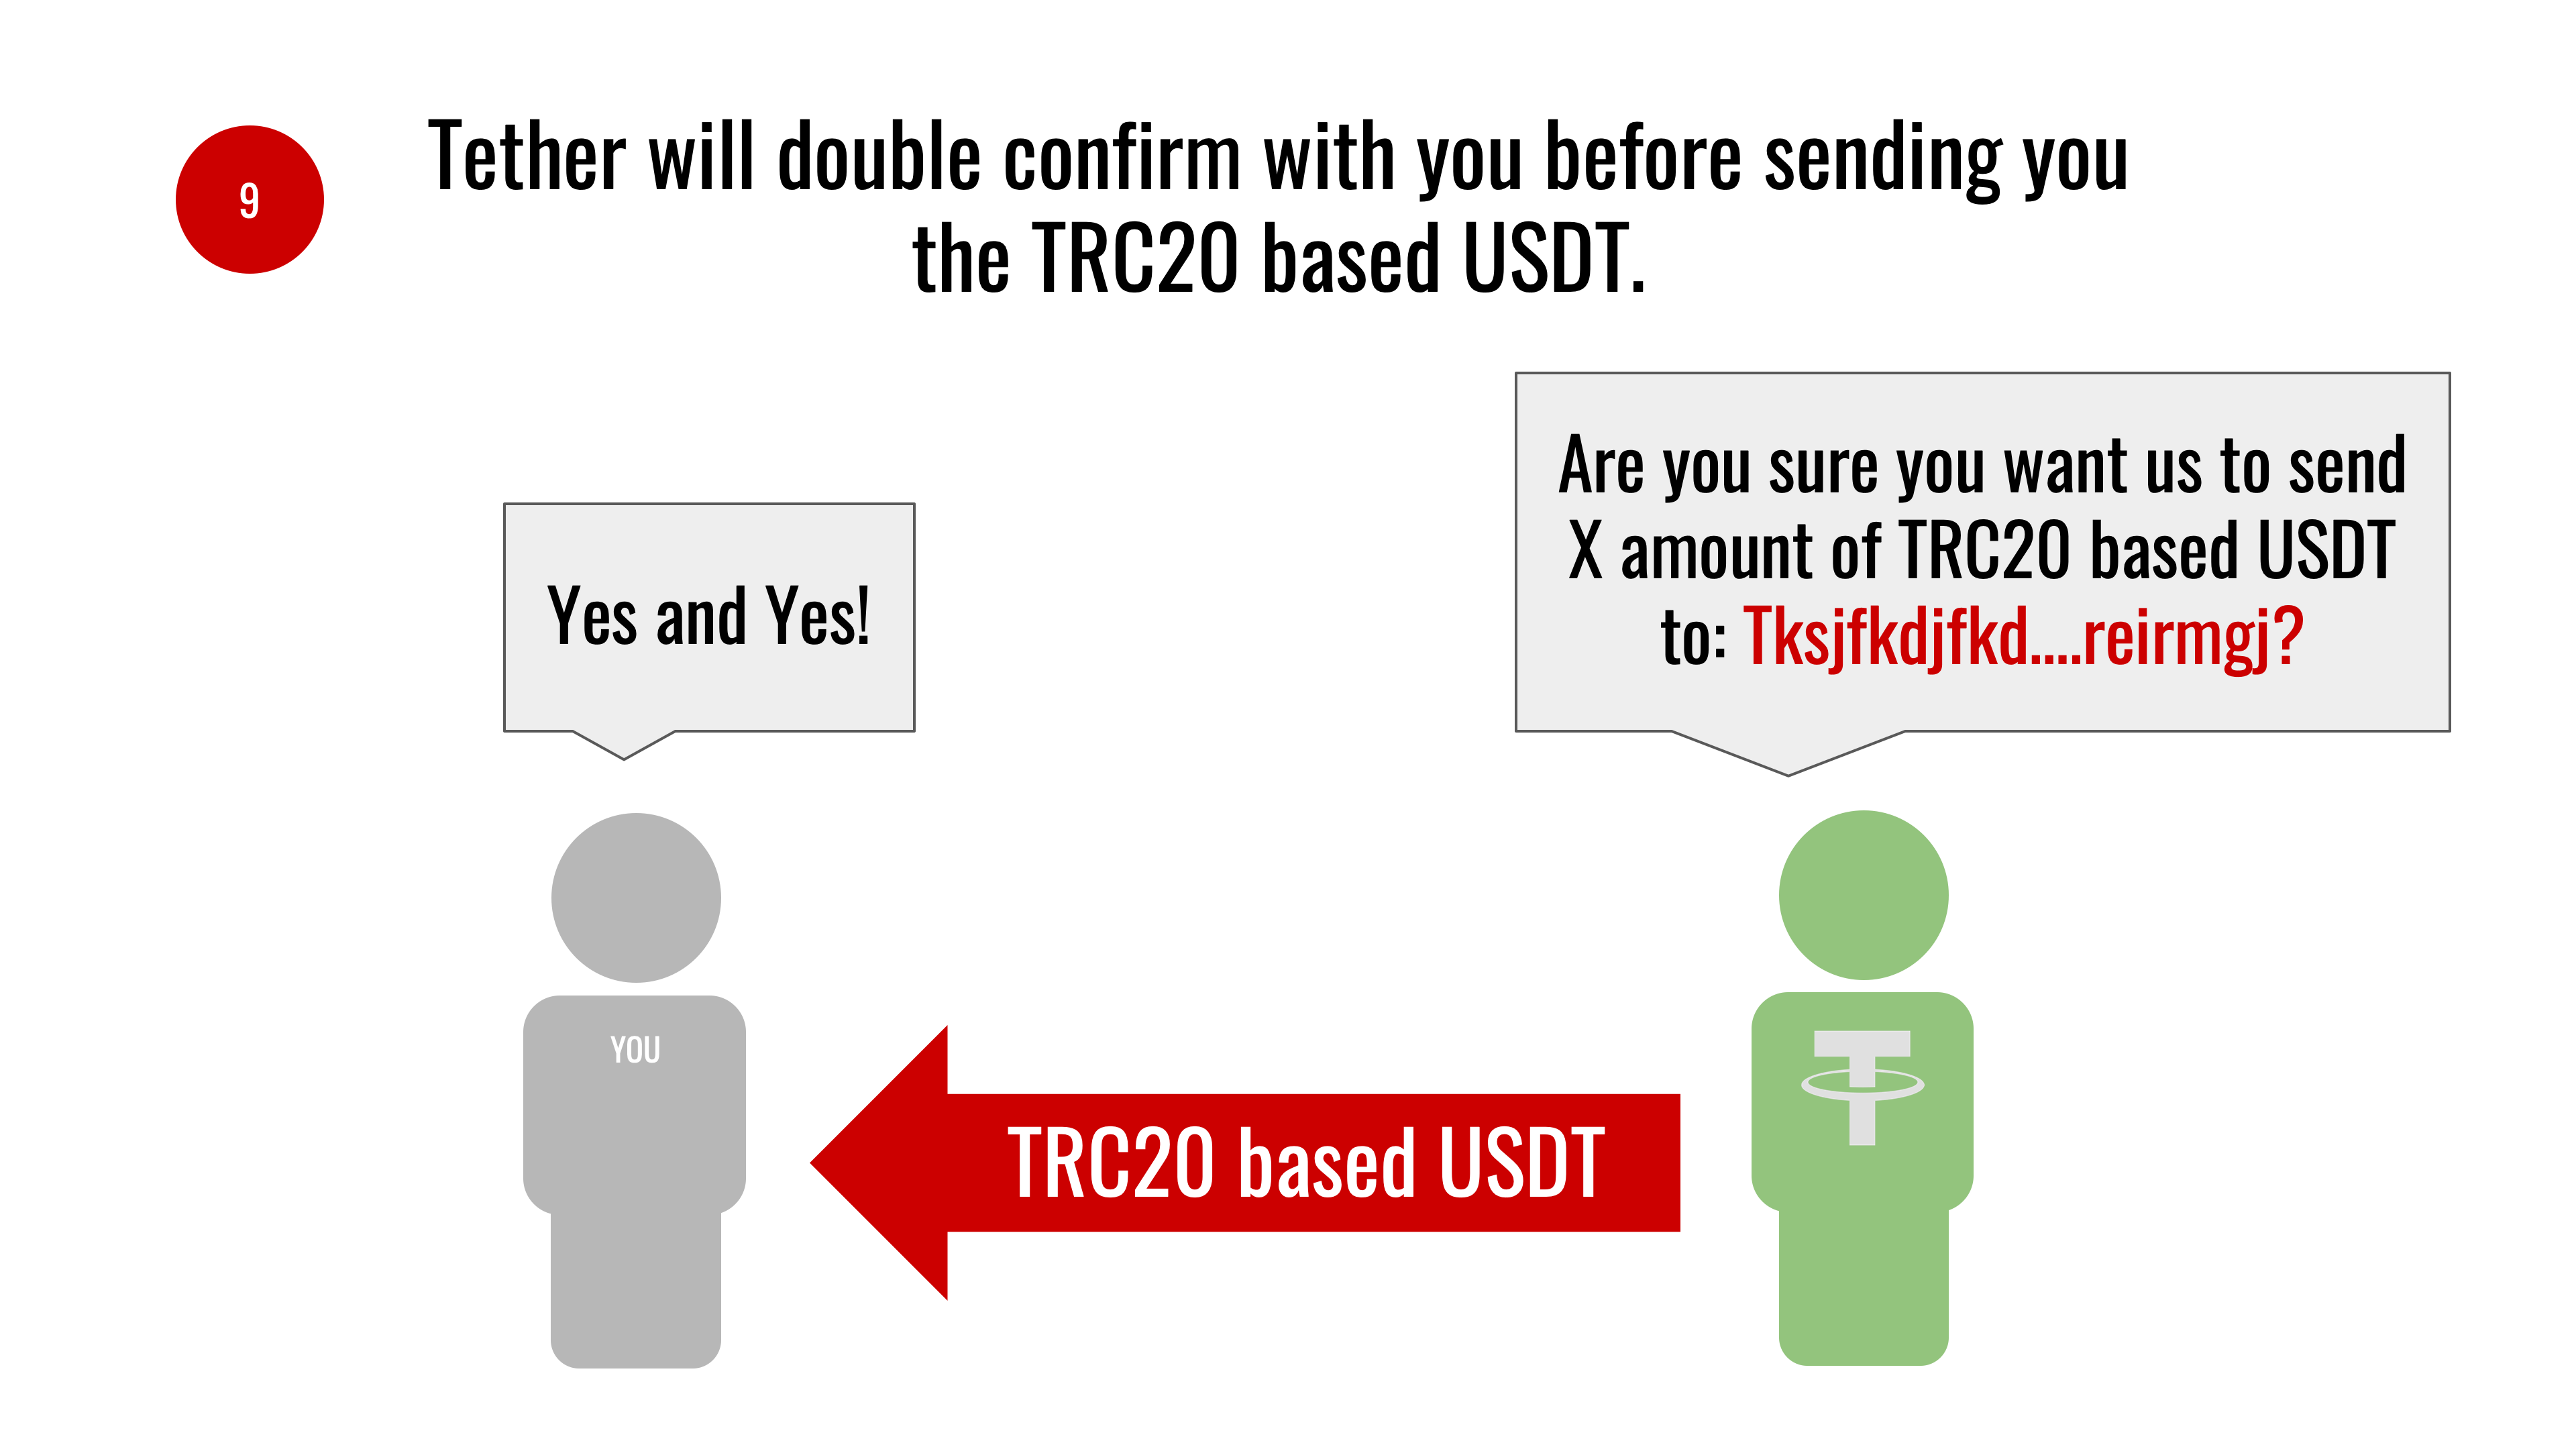 How to swap your USDT-OMNI or USDT-ETH for TRC20 based ...